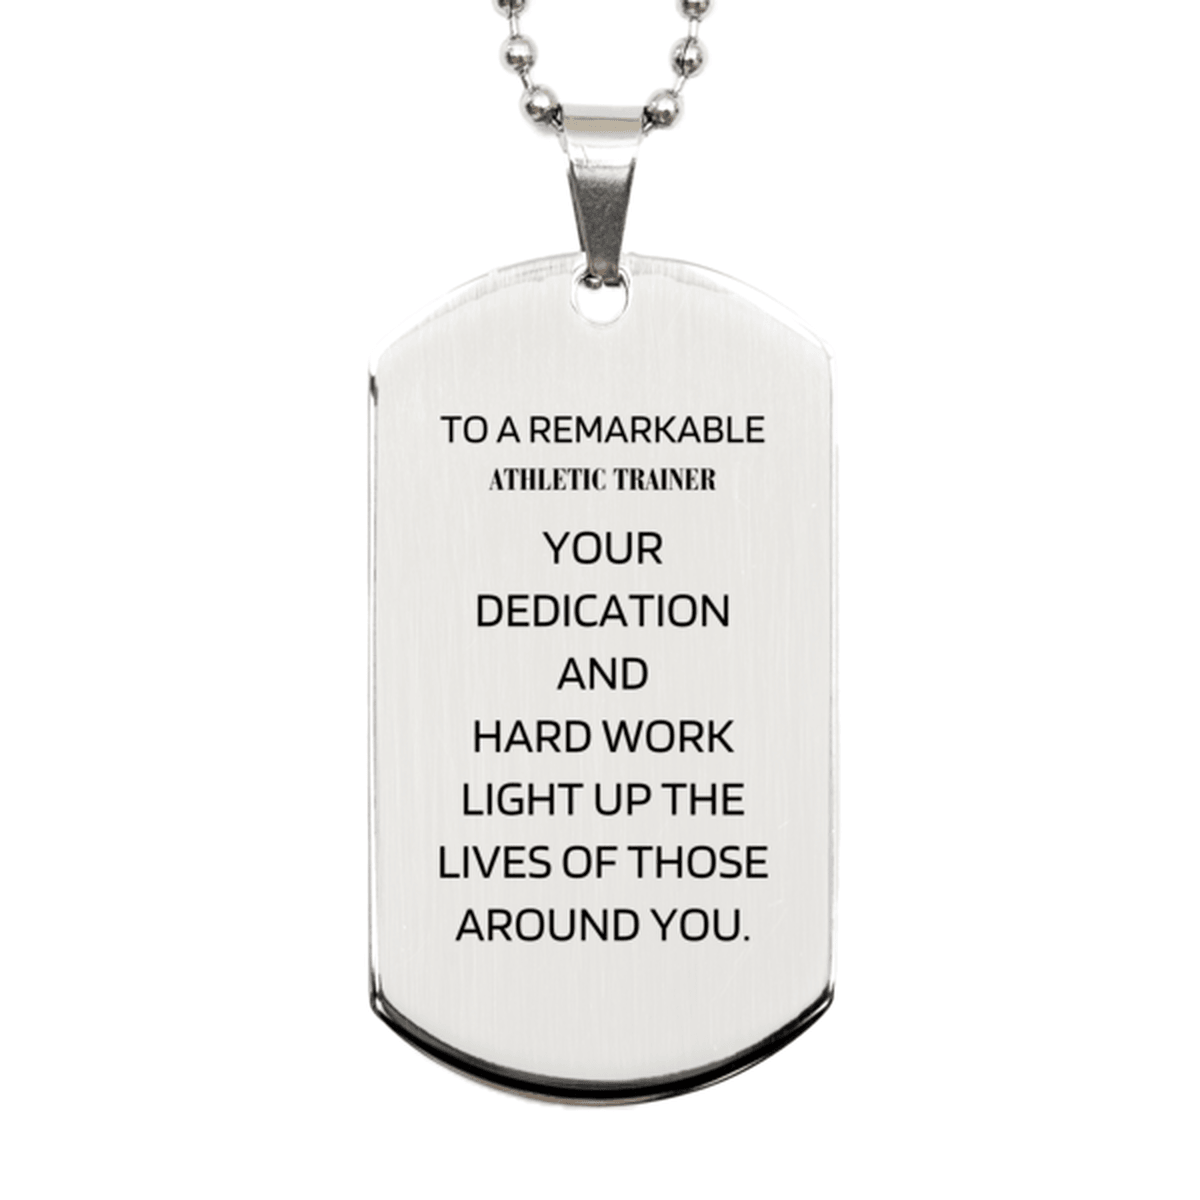 Remarkable Athletic Trainer Gifts, Your dedication and hard work, Inspirational Birthday Christmas Unique Silver Dog Tag For Athletic Trainer, Coworkers, Men, Women, Friends - Mallard Moon Gift Shop